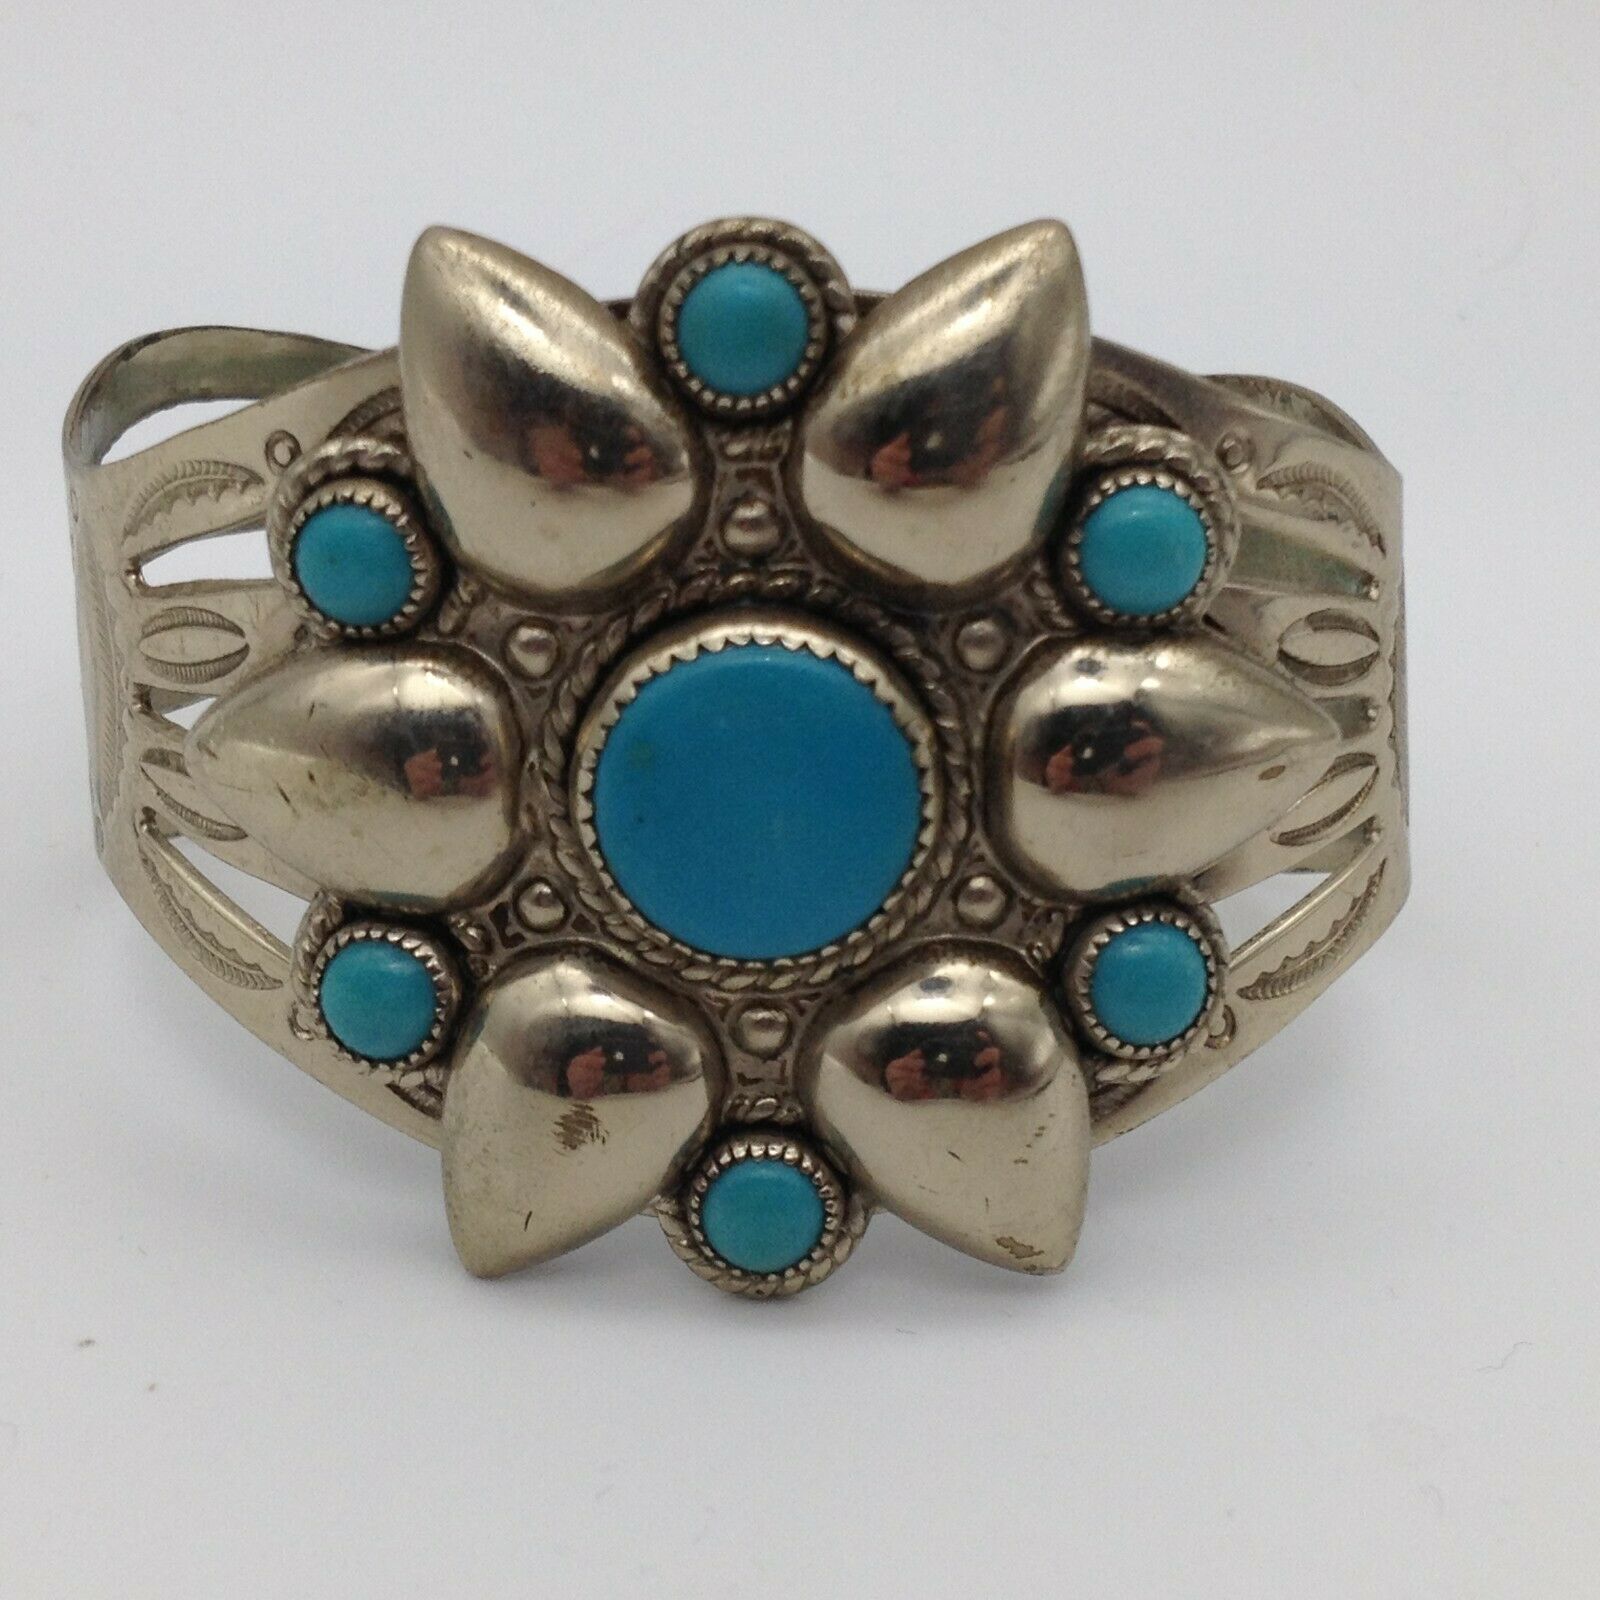 Signed Bell Trading Post Vintage Turquoise Flower Cuff Bracelet Nickel Silver